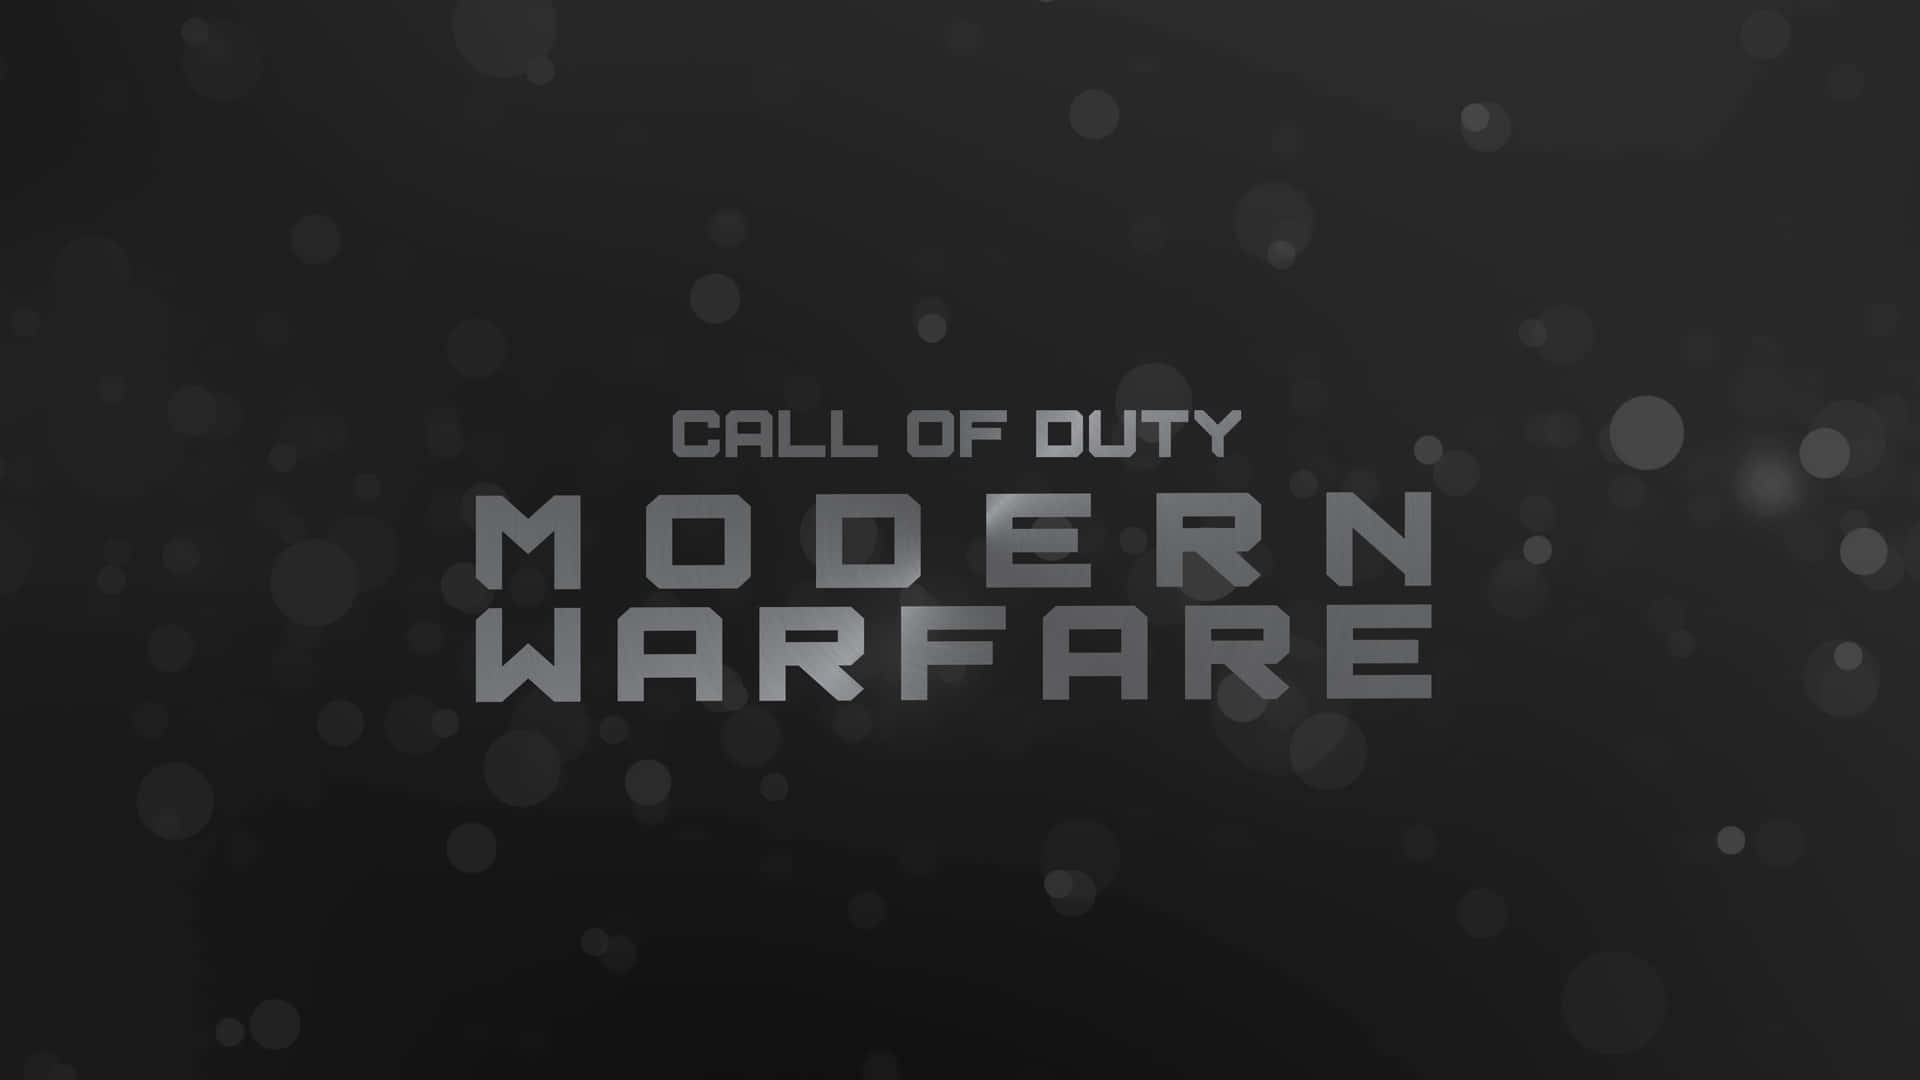 "Call Of Duty Modern Warfare - Ready For Action!"